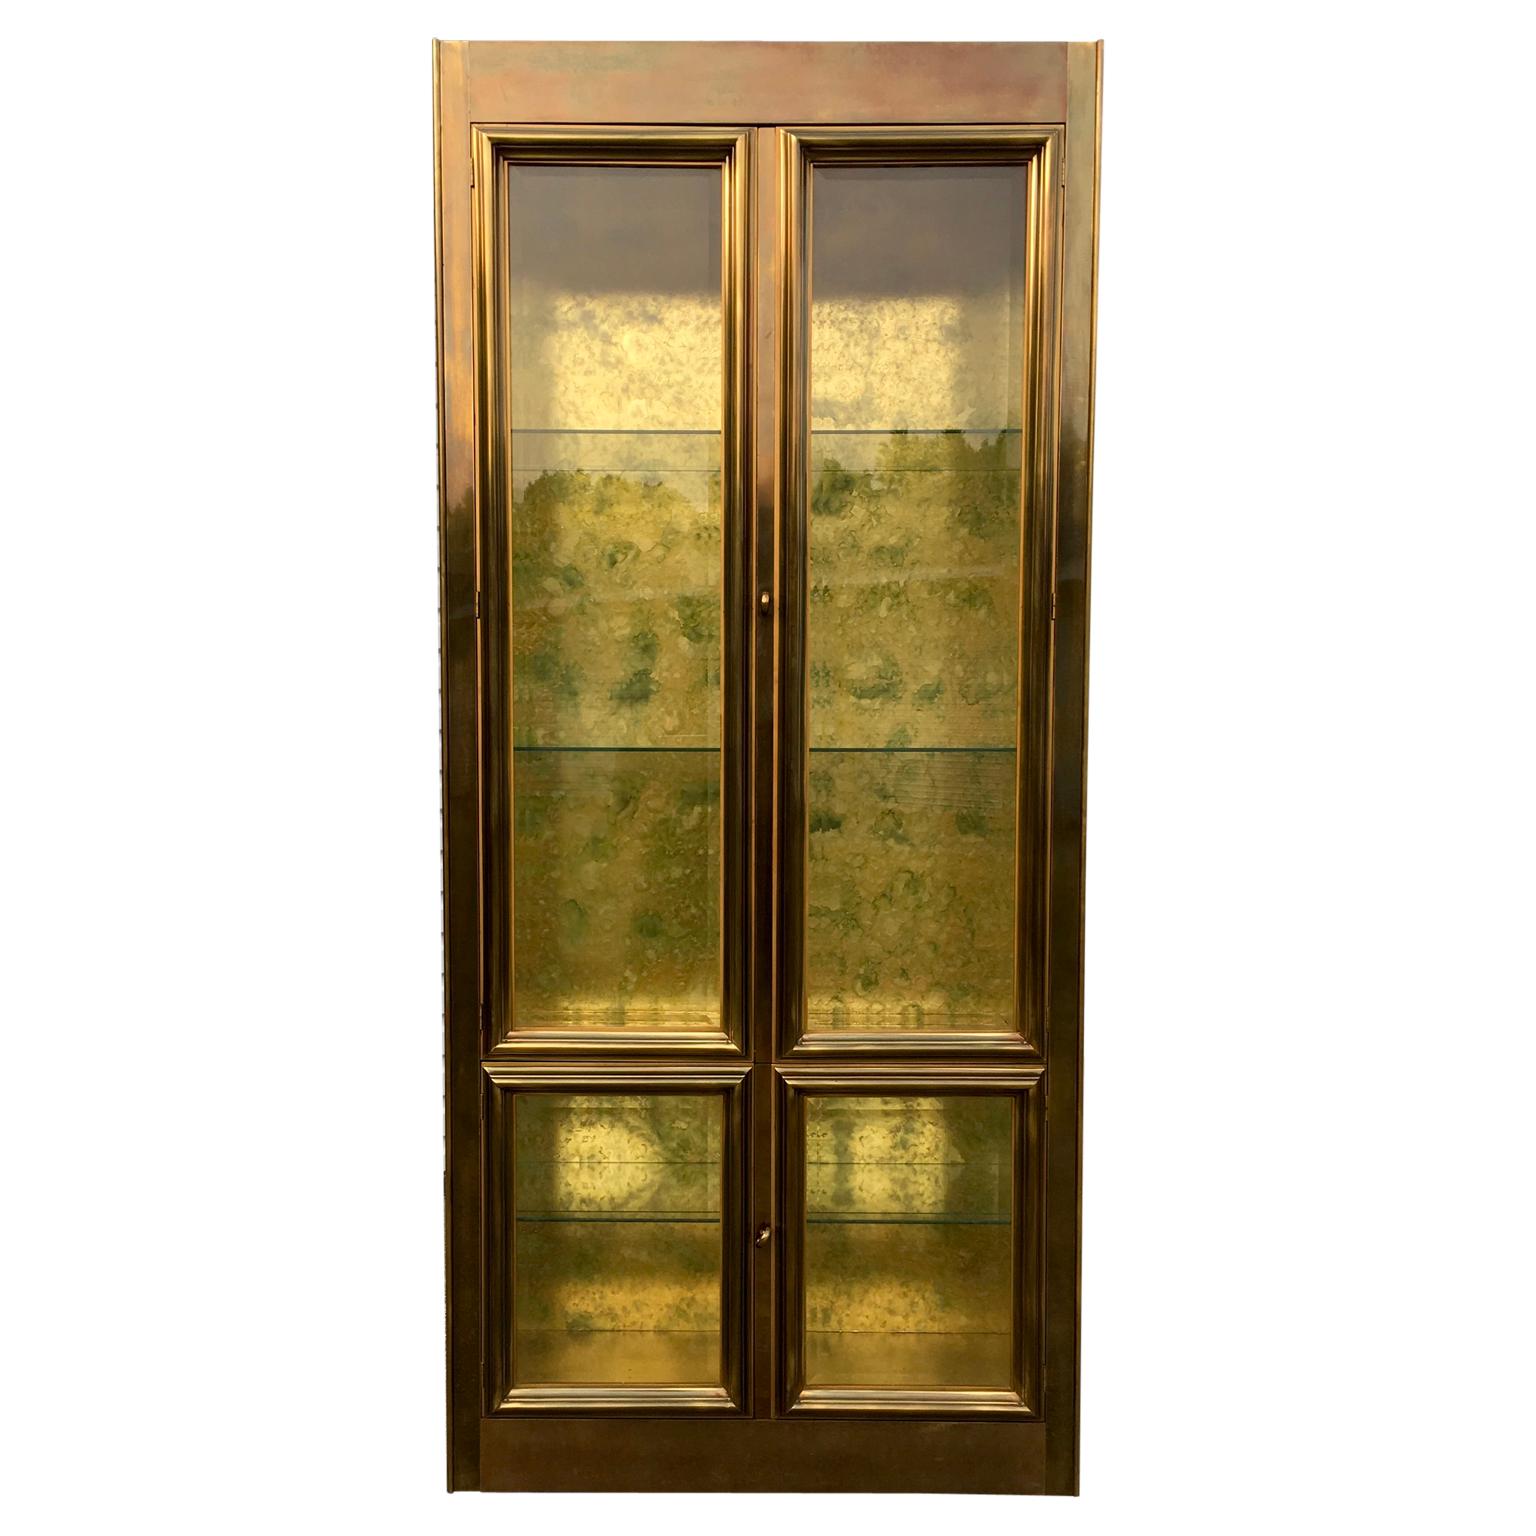 A Mastercraft Brass Vitrine display cabinet. Beautiful interior, lighted with glass shelves. The glass on the doors and sides are with thick bevel.
Brass has a very nice patina.